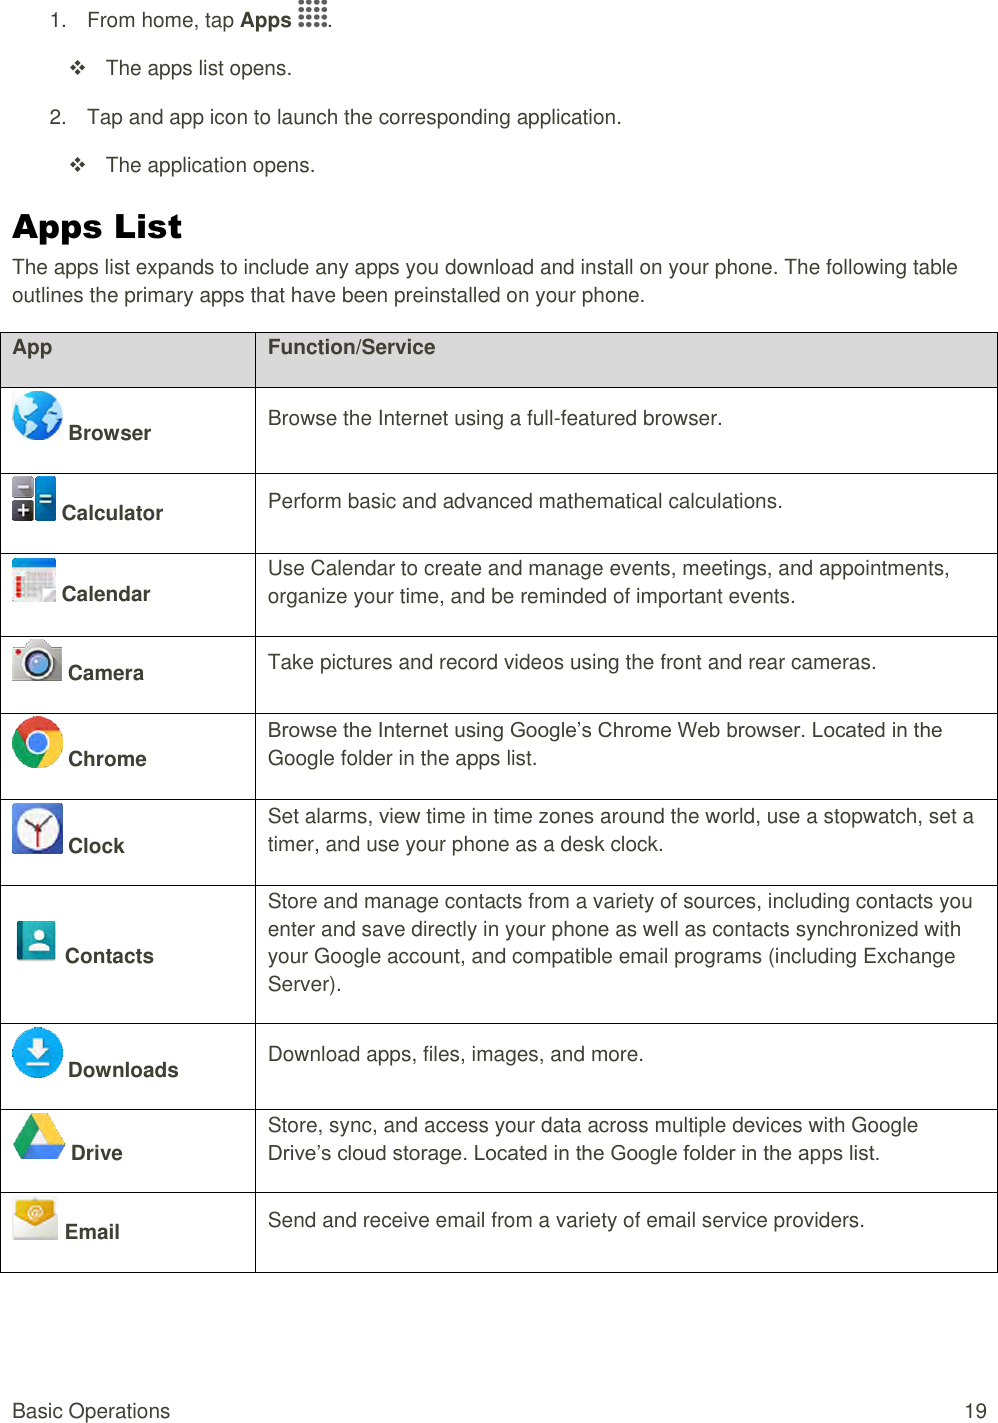 Basic Operations  19 1.  From home, tap Apps  .    The apps list opens. 2.  Tap and app icon to launch the corresponding application.    The application opens. Apps List  The apps list expands to include any apps you download and install on your phone. The following table outlines the primary apps that have been preinstalled on your phone. App Function/Service  Browser Browse the Internet using a full-featured browser.   Calculator  Perform basic and advanced mathematical calculations.   Calendar Use Calendar to create and manage events, meetings, and appointments, organize your time, and be reminded of important events.  Camera Take pictures and record videos using the front and rear cameras.   Chrome Browse the Internet using Google’s Chrome Web browser. Located in the Google folder in the apps list.   Clock Set alarms, view time in time zones around the world, use a stopwatch, set a timer, and use your phone as a desk clock.   Contacts Store and manage contacts from a variety of sources, including contacts you enter and save directly in your phone as well as contacts synchronized with your Google account, and compatible email programs (including Exchange Server).   Downloads Download apps, files, images, and more.  Drive Store, sync, and access your data across multiple devices with Google Drive’s cloud storage. Located in the Google folder in the apps list.   Email Send and receive email from a variety of email service providers.  